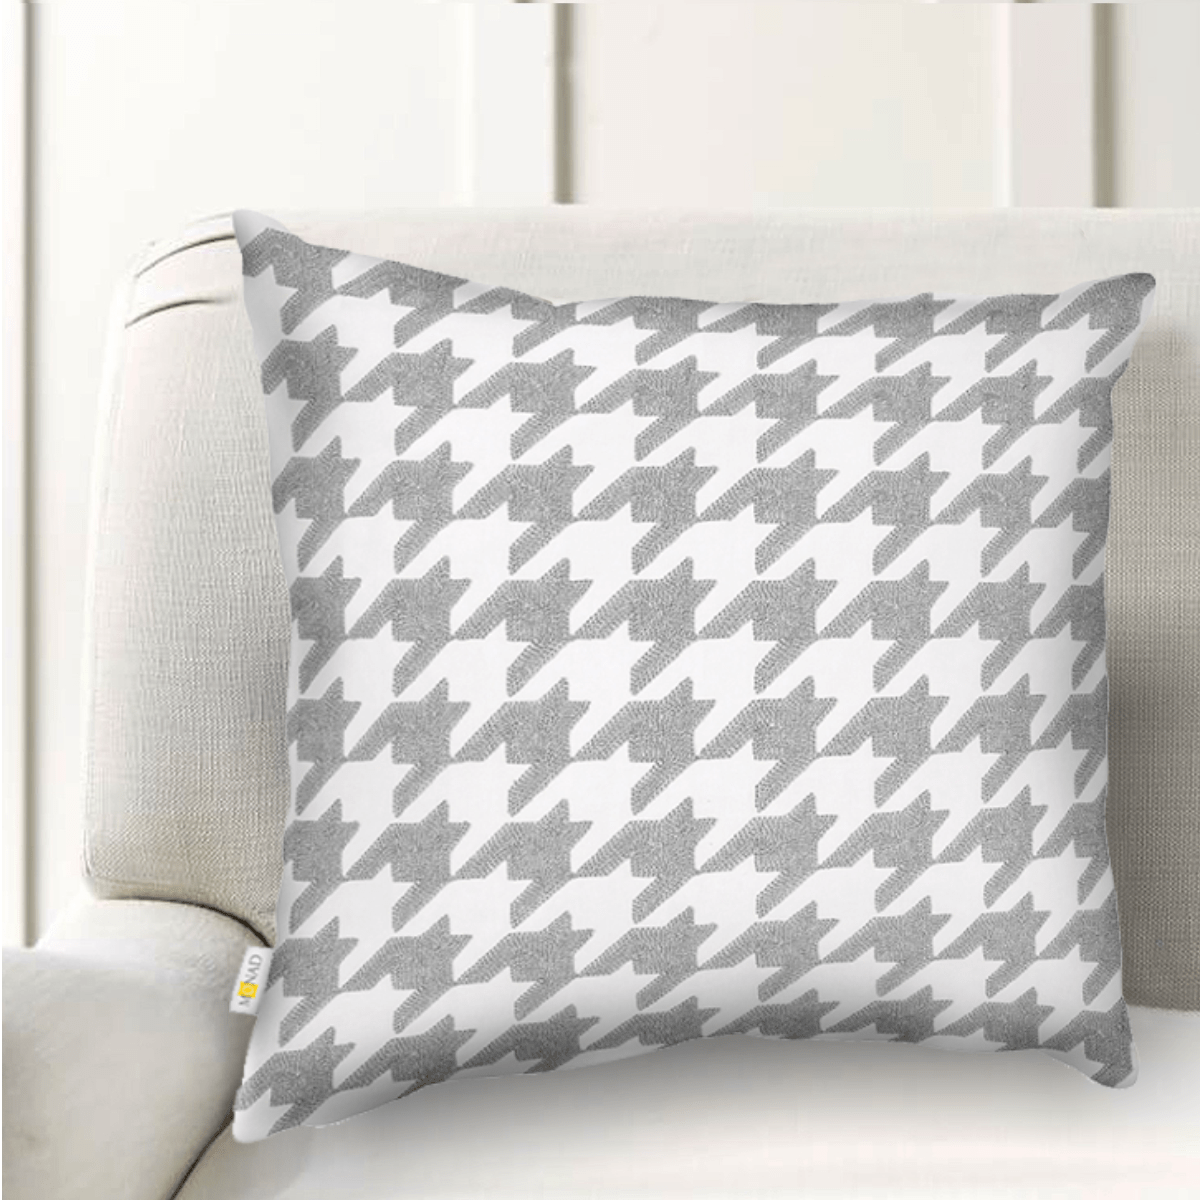 Blue Houndstooth Pattern Embroidered Cushion Cover